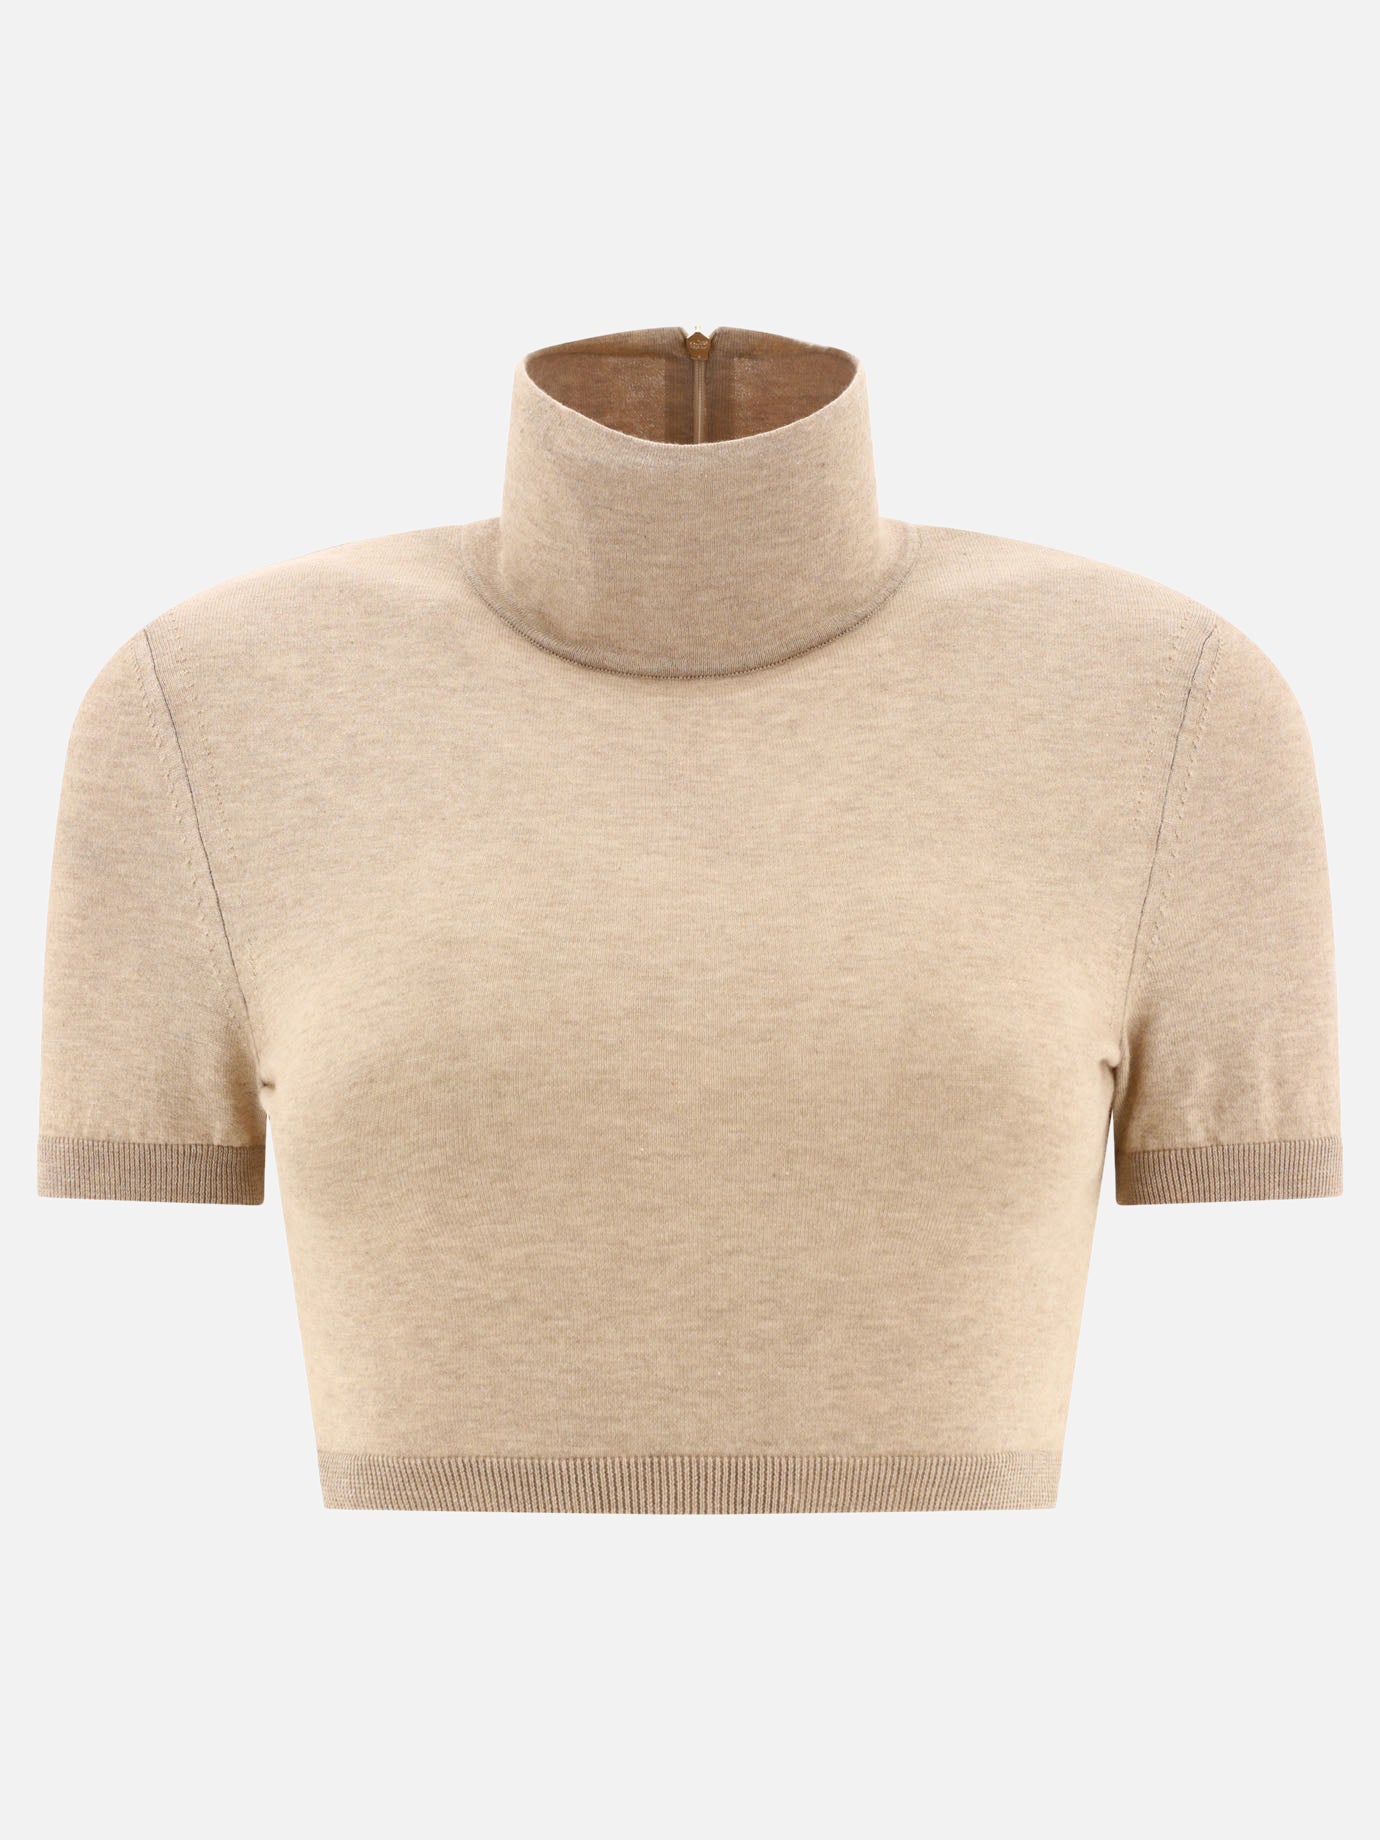 "Aire" cropped turtleneck